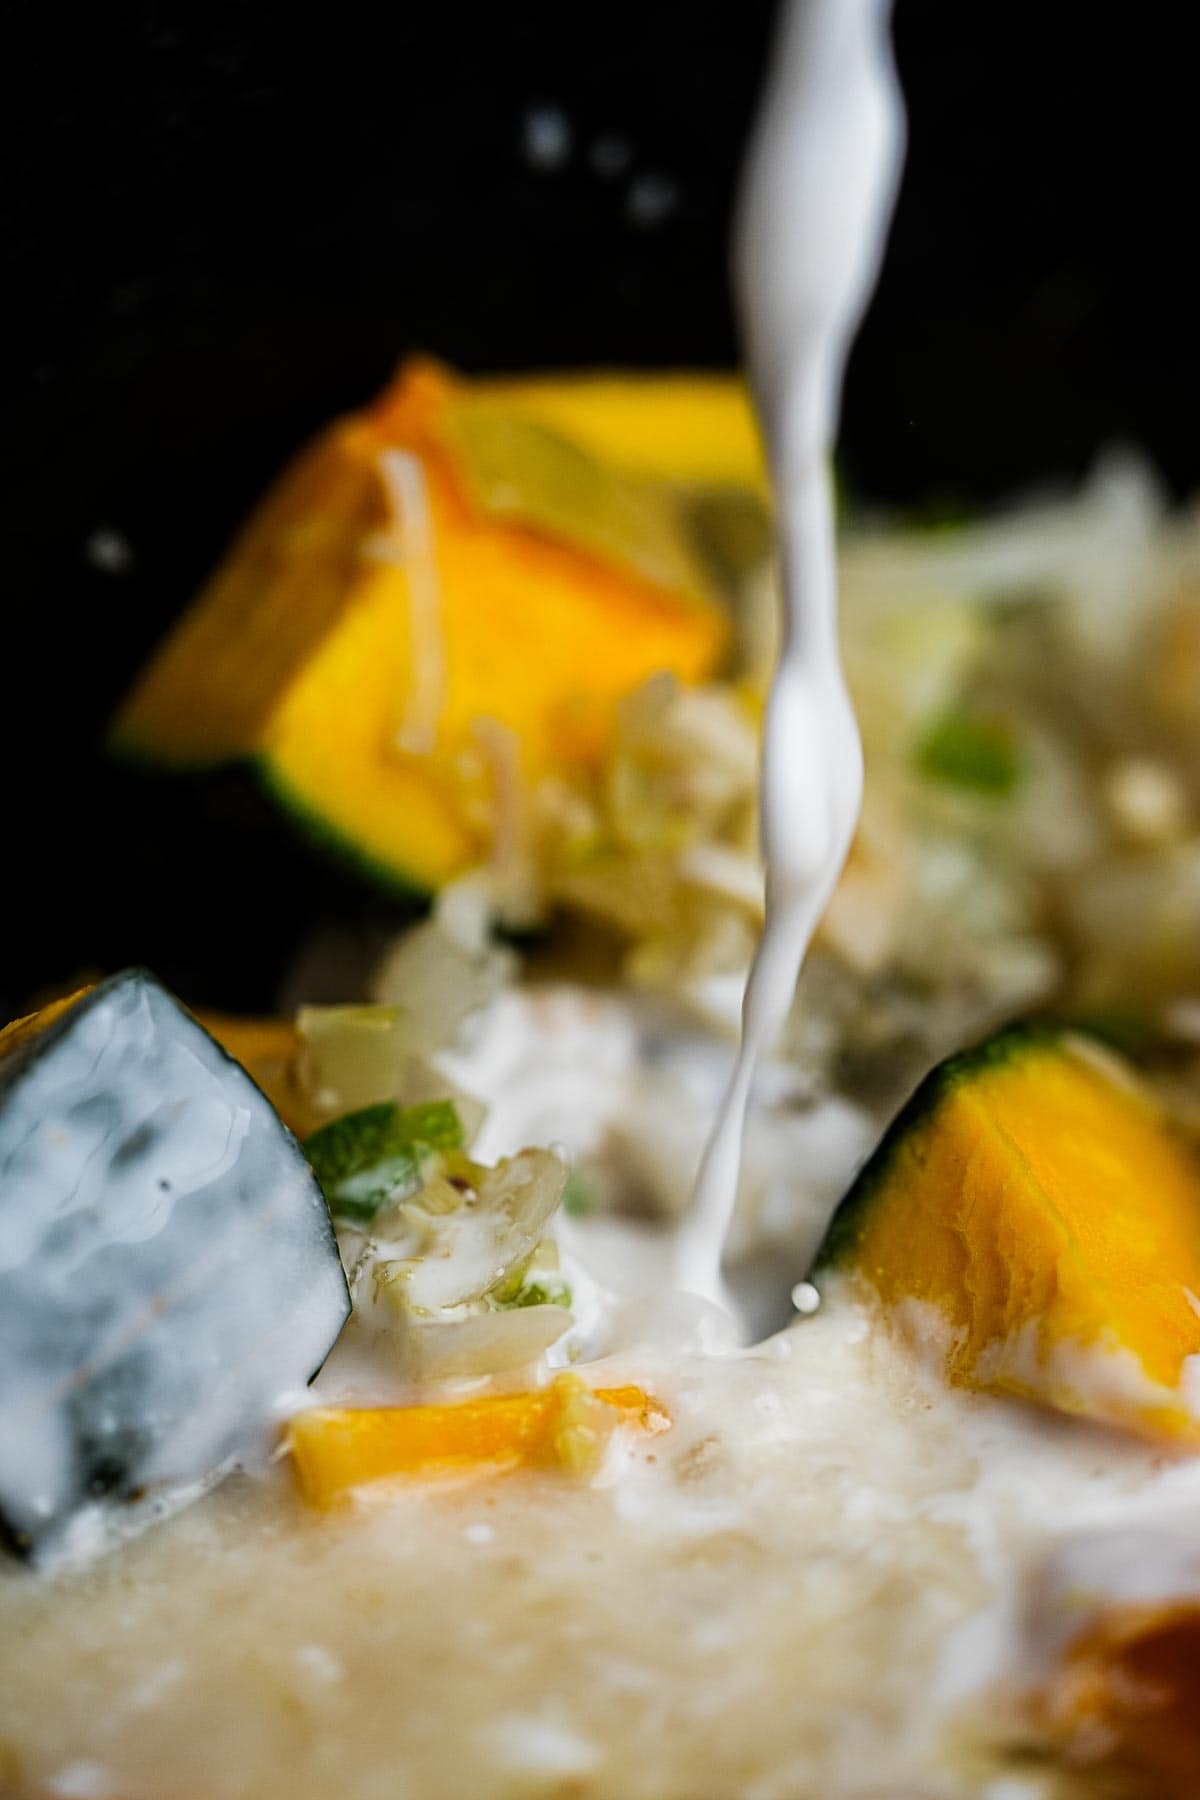 Coconut milk is being poured into a pot with kabocha and aromatics in it.